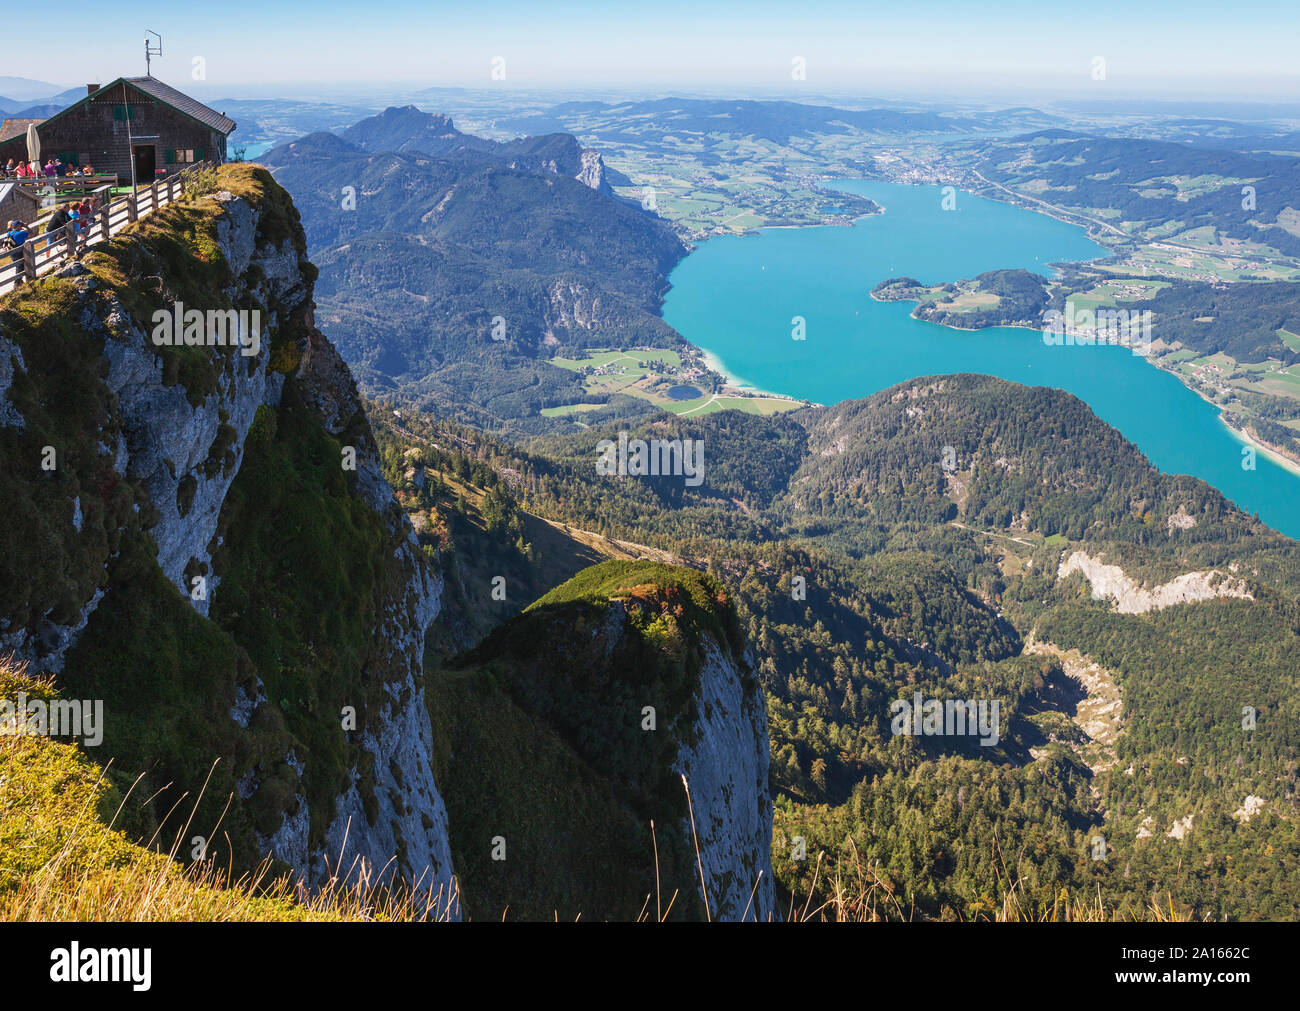 Himmelspforte Schafberg on mountain peak with lake on sunny day Stock Photo